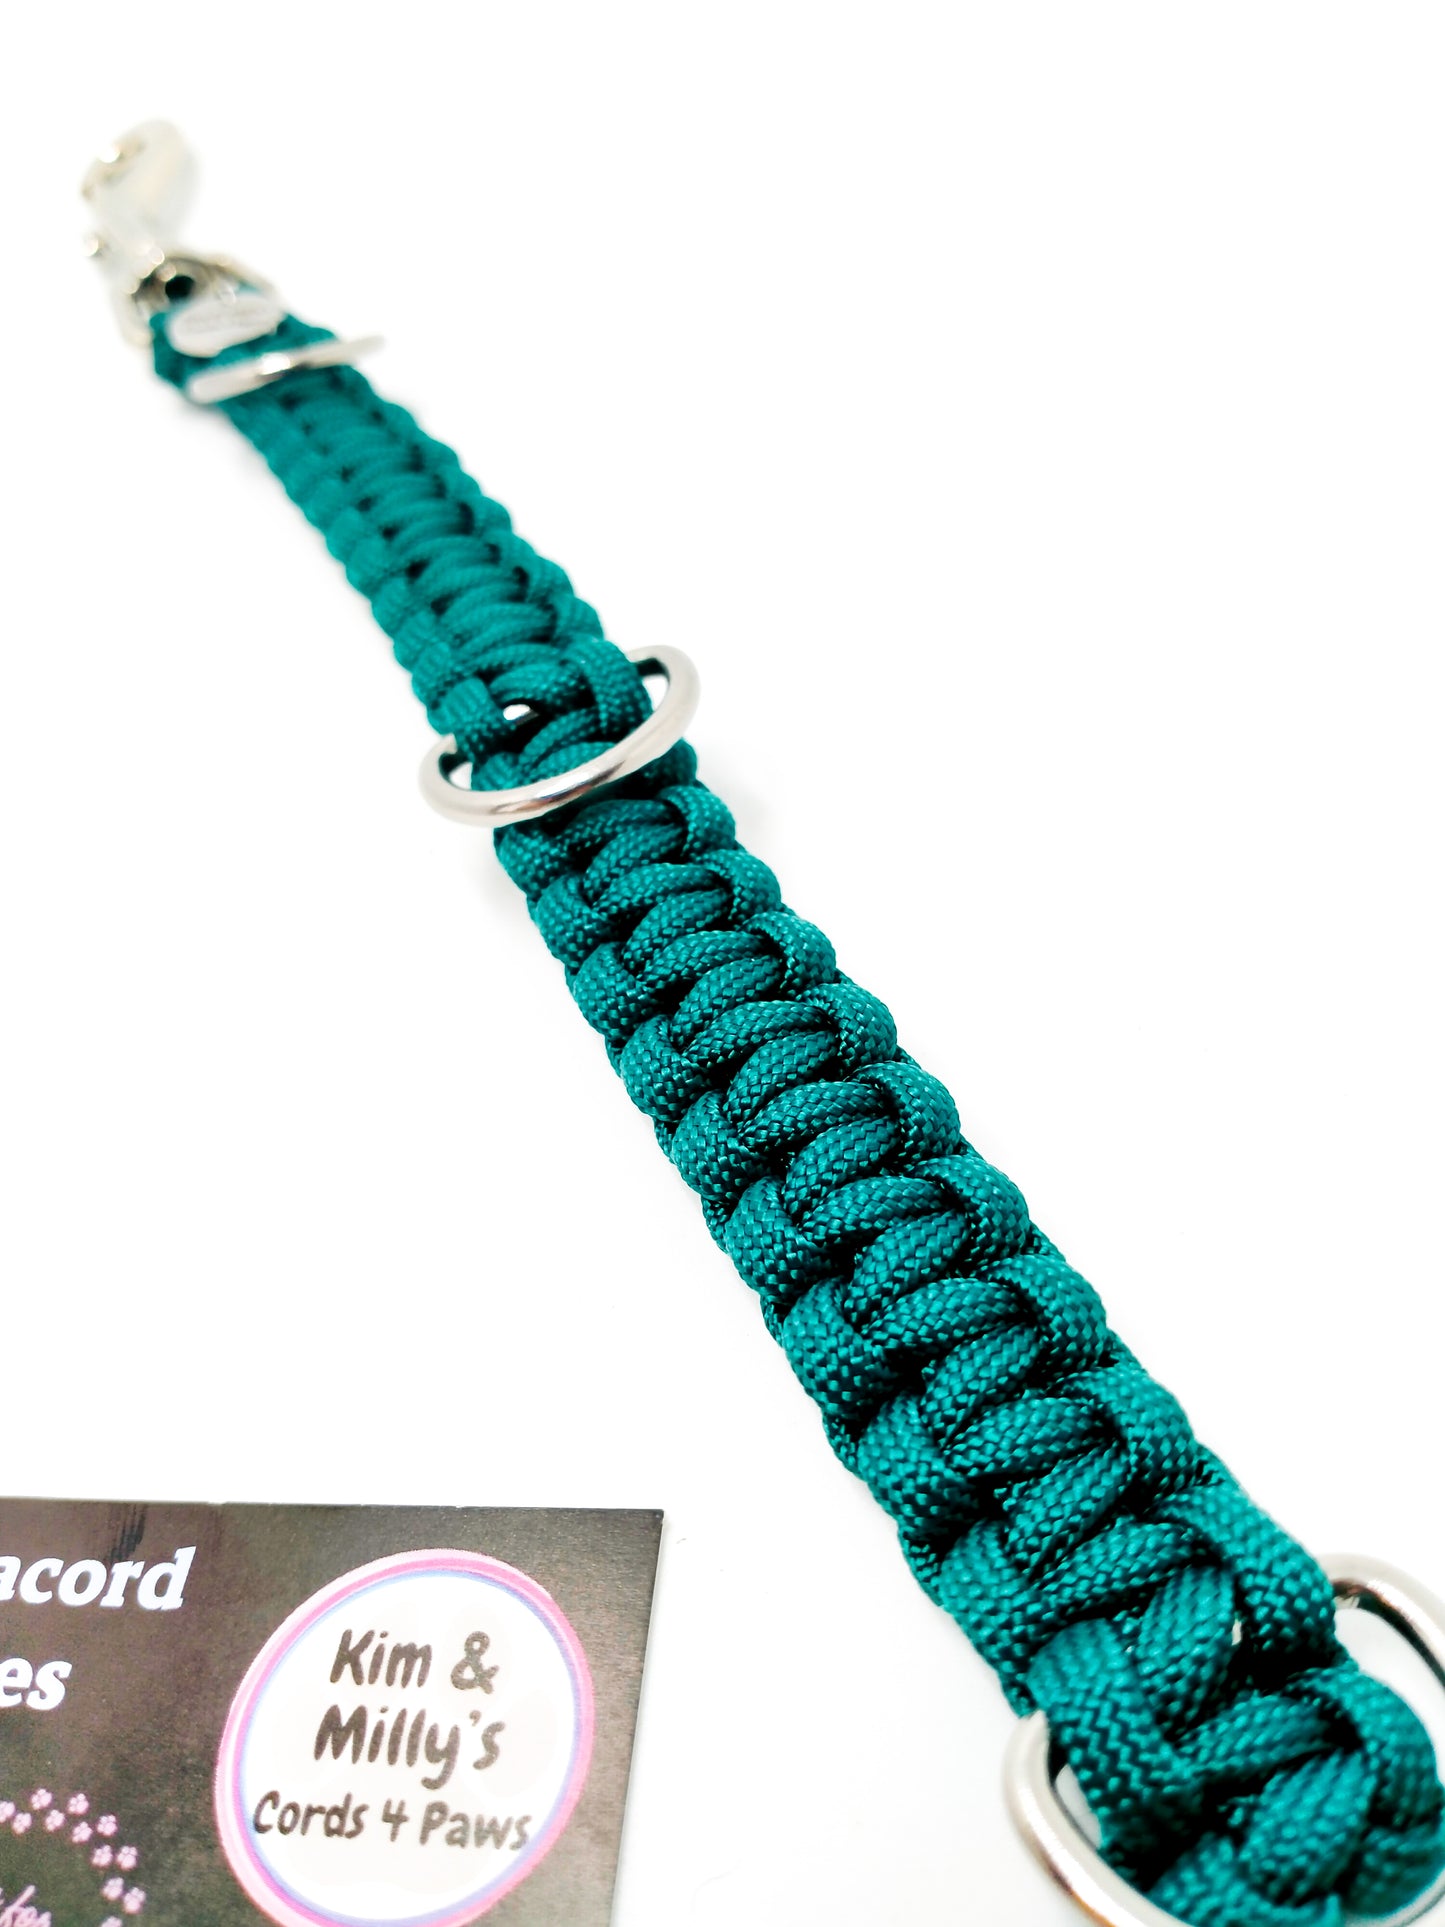 Groomer's Extension Strap